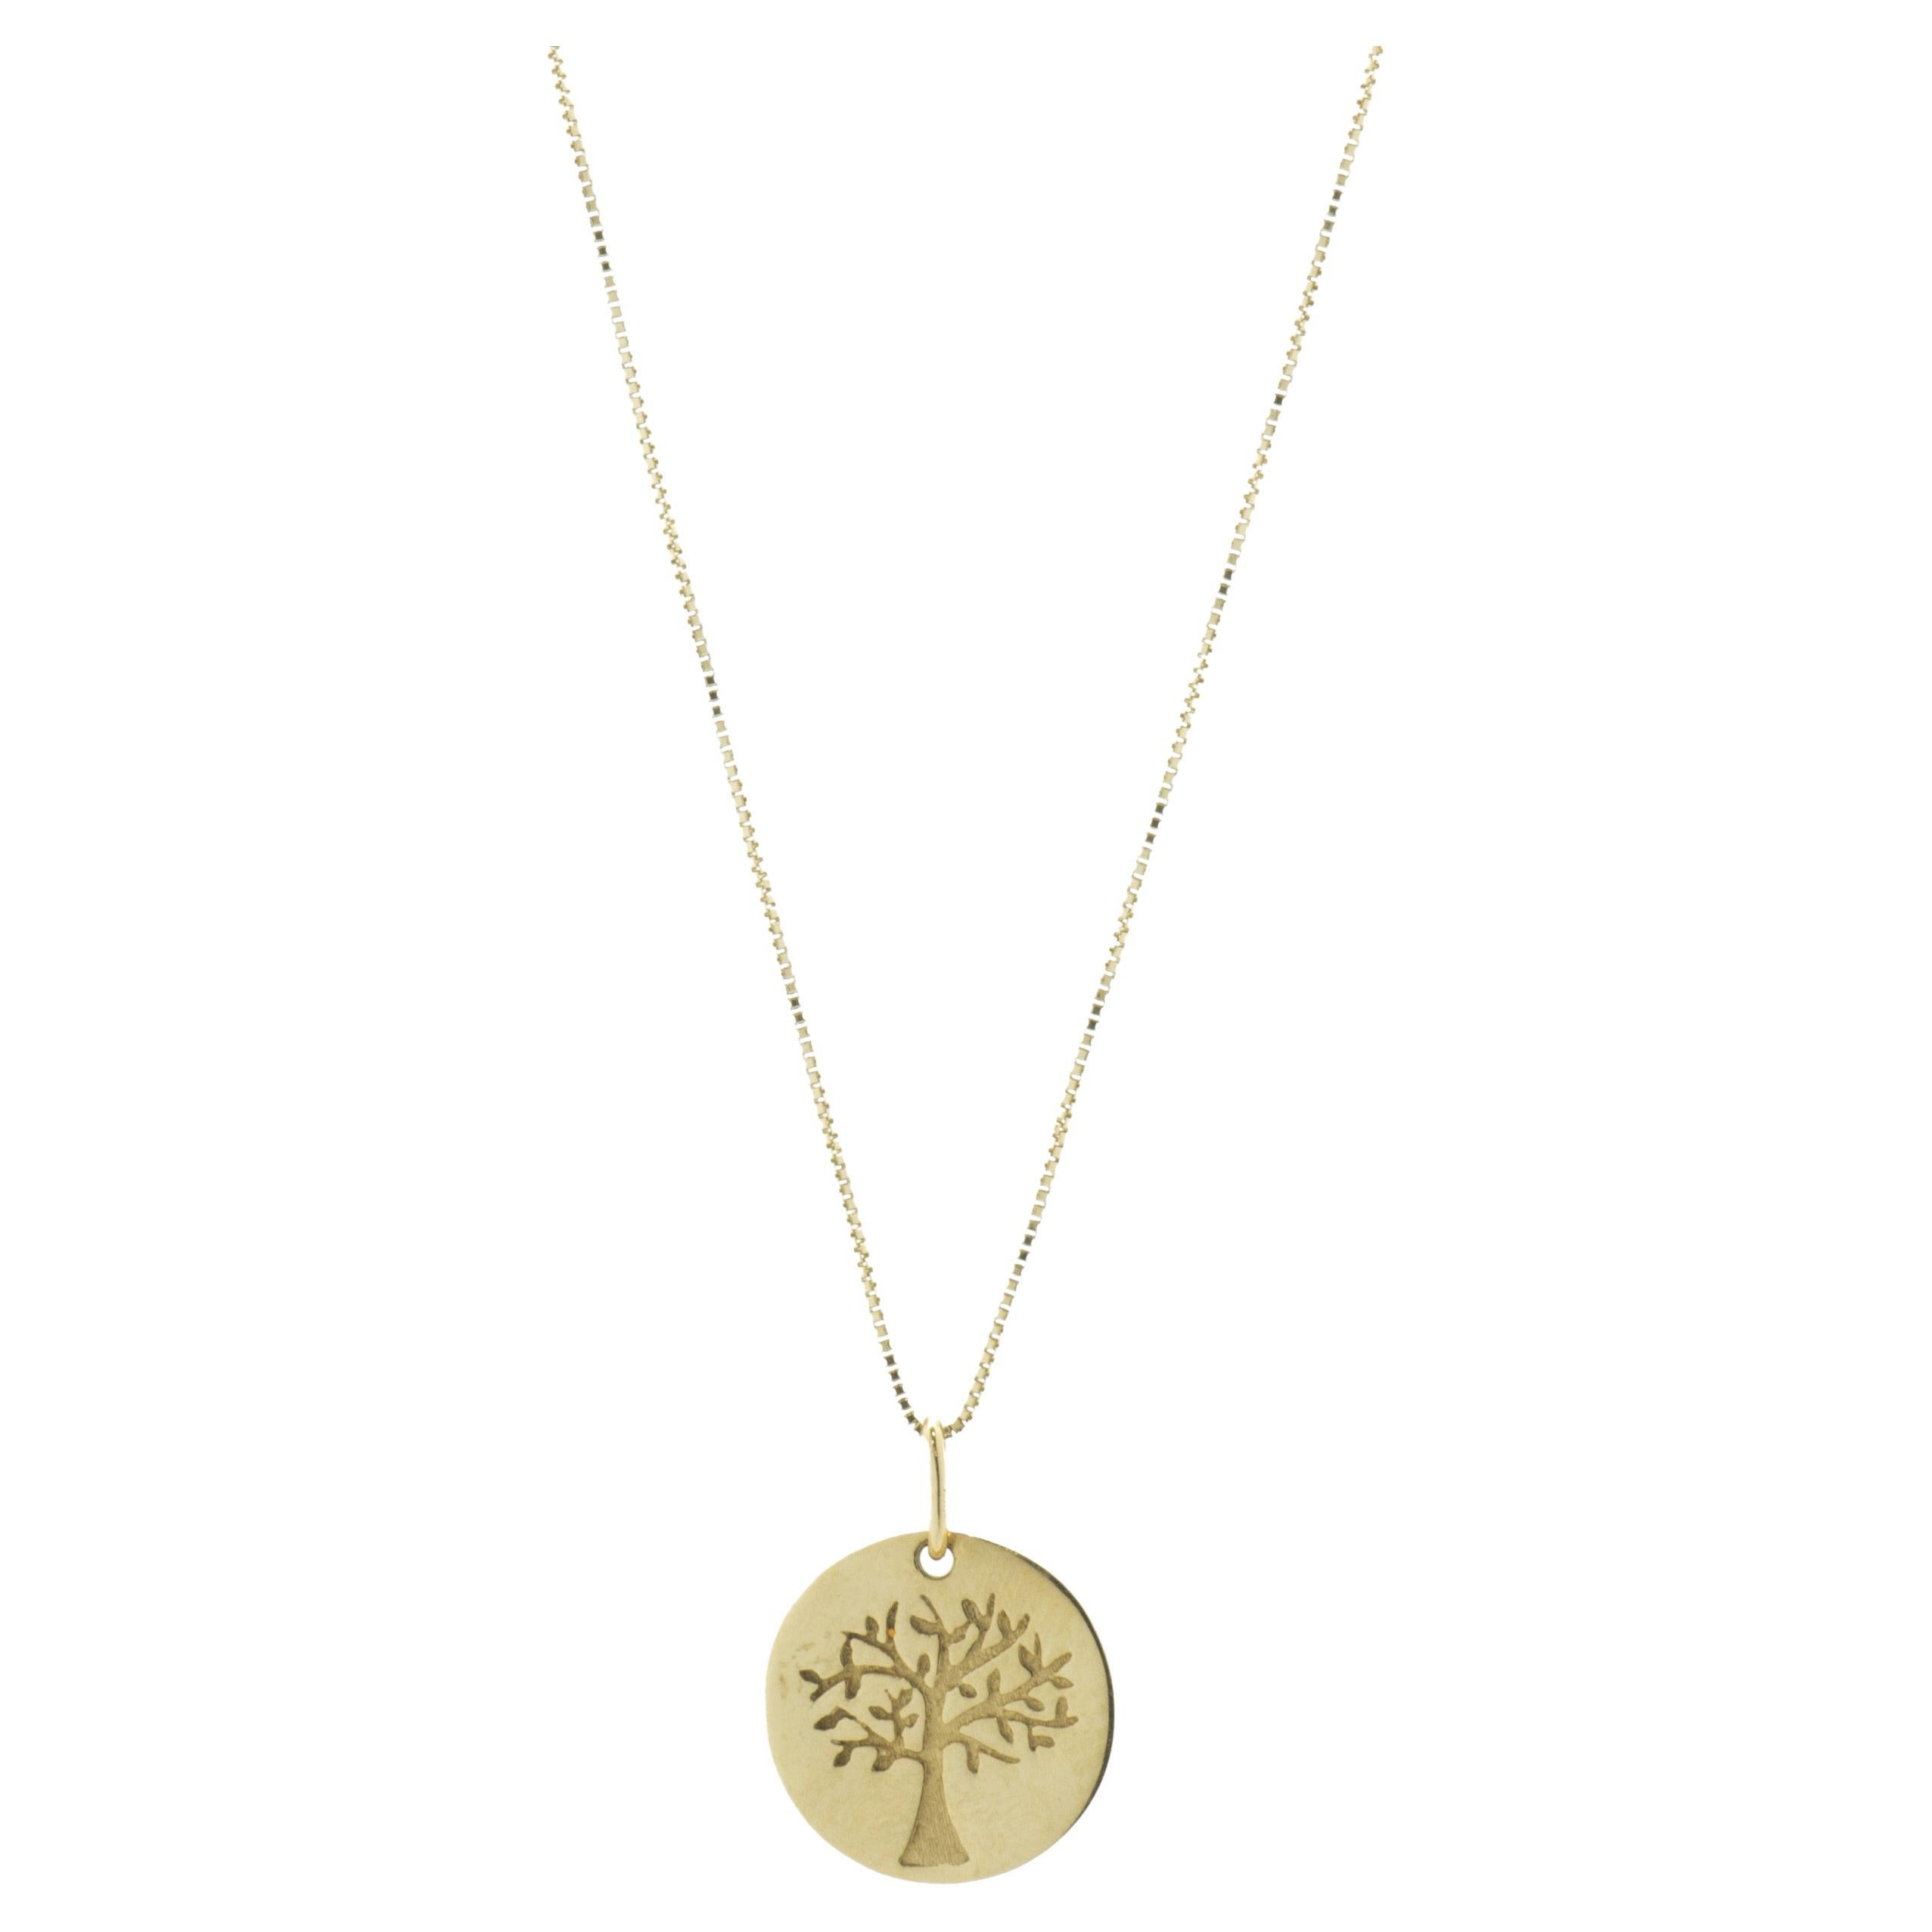 Collier Tree of Life en or jaune 14 carats